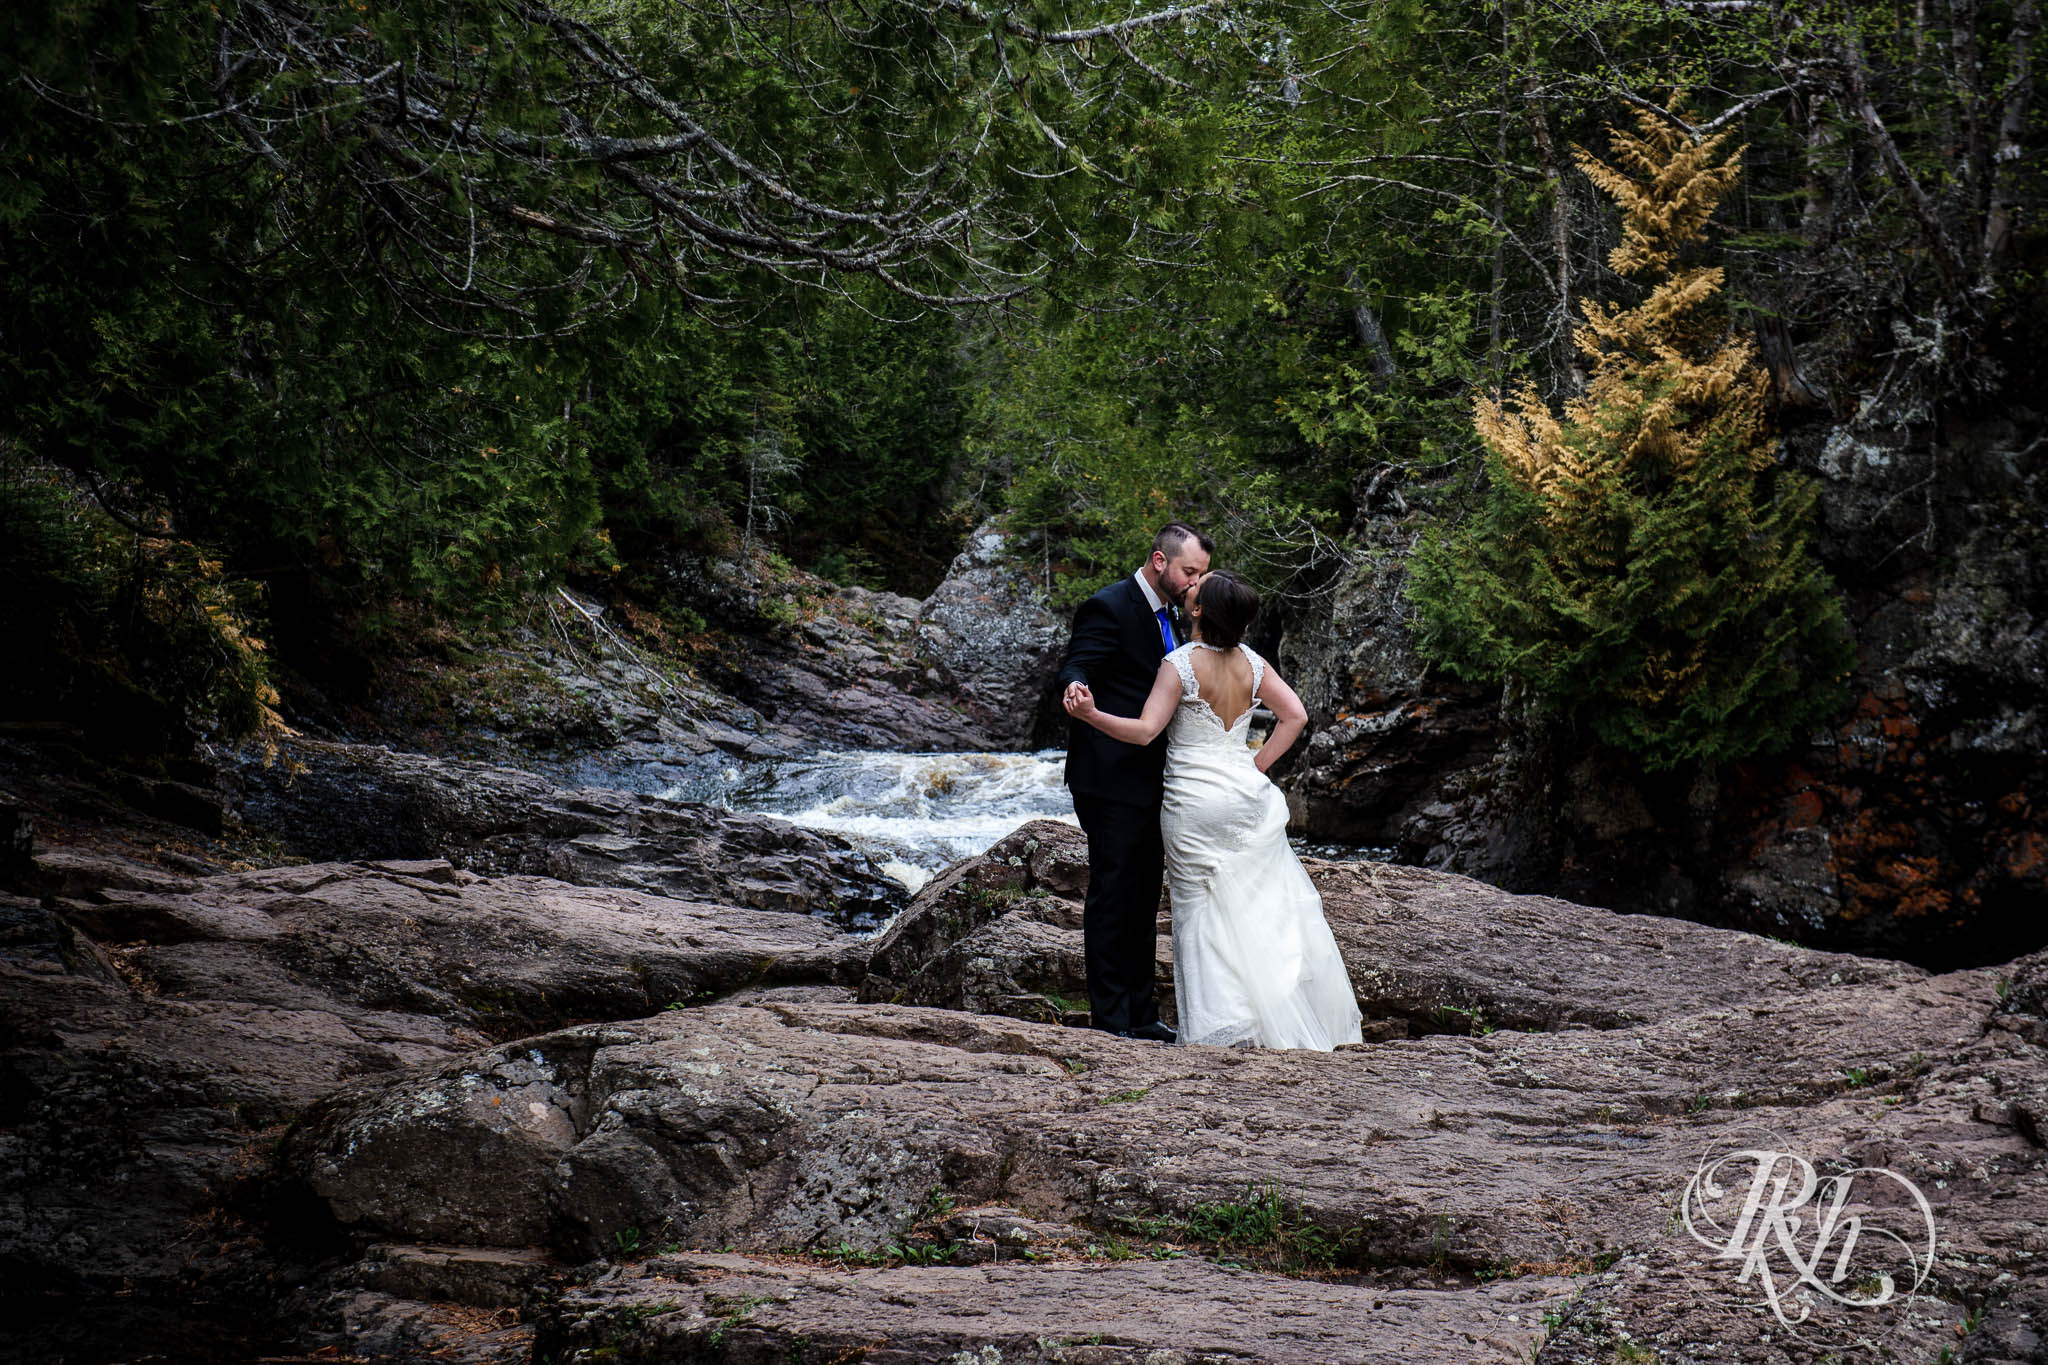 Bride and groom kissing at the bottom of a waterfall.